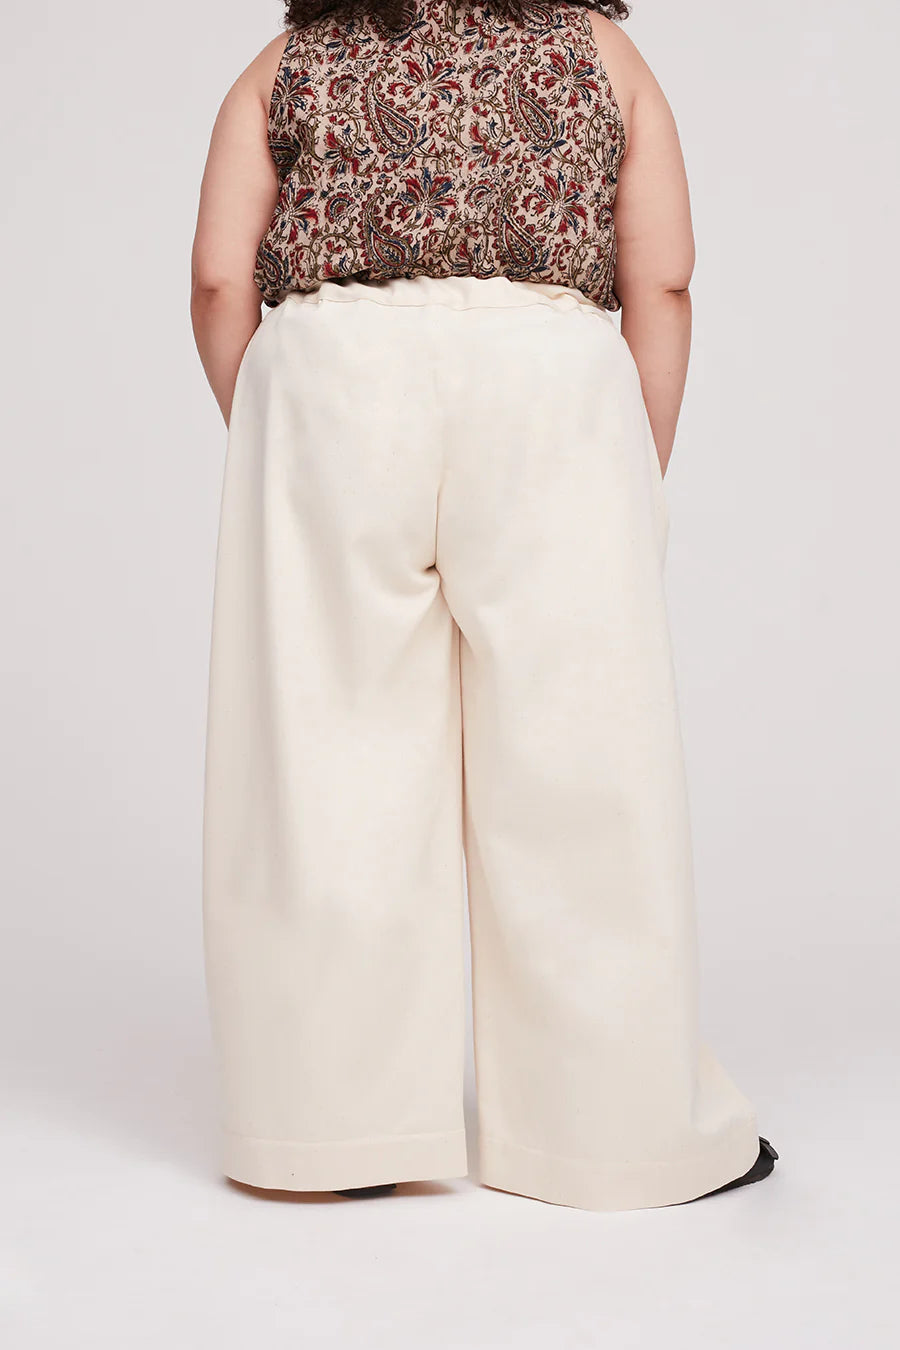 The Modern Sewing Co. Spring Trousers - PDF Pattern